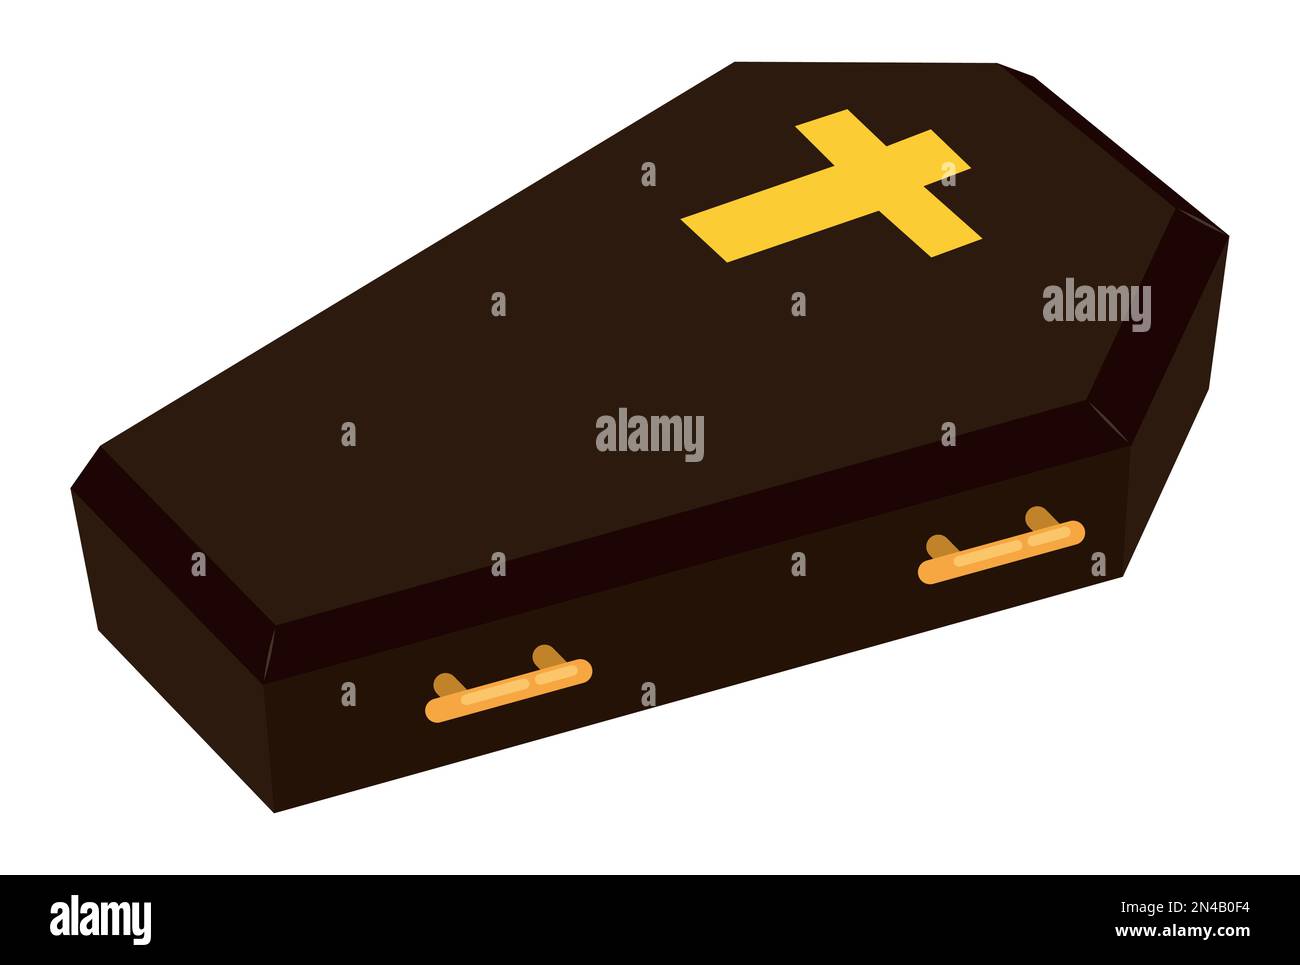 Design in flat style of dark brown coffin decorated with golden cross and handles over white background. Stock Vector